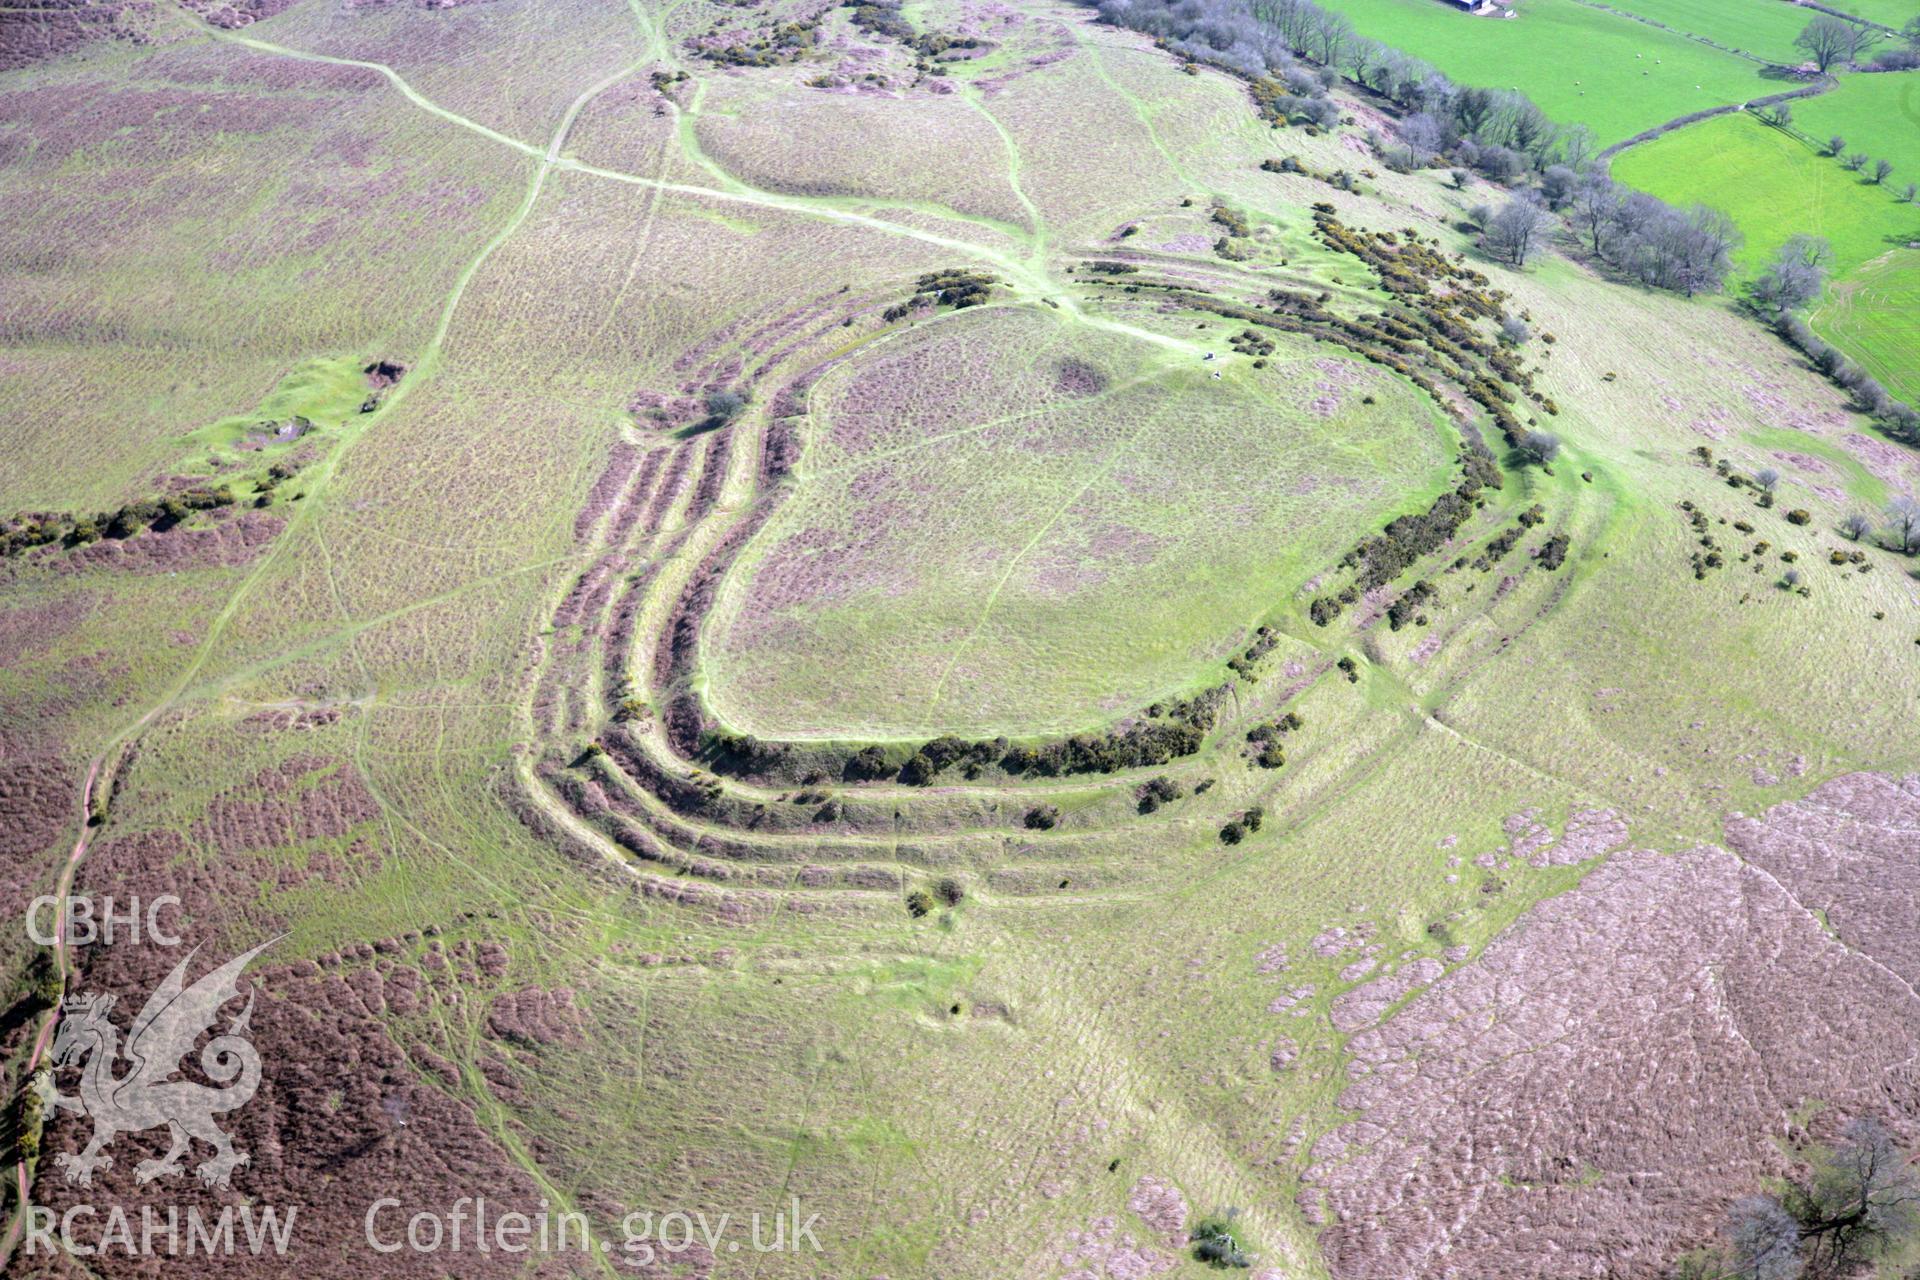 RCAHMW colour oblique photograph of Pen y Crug hillfort. Taken by Toby Driver and Oliver Davies on 28/03/2012.